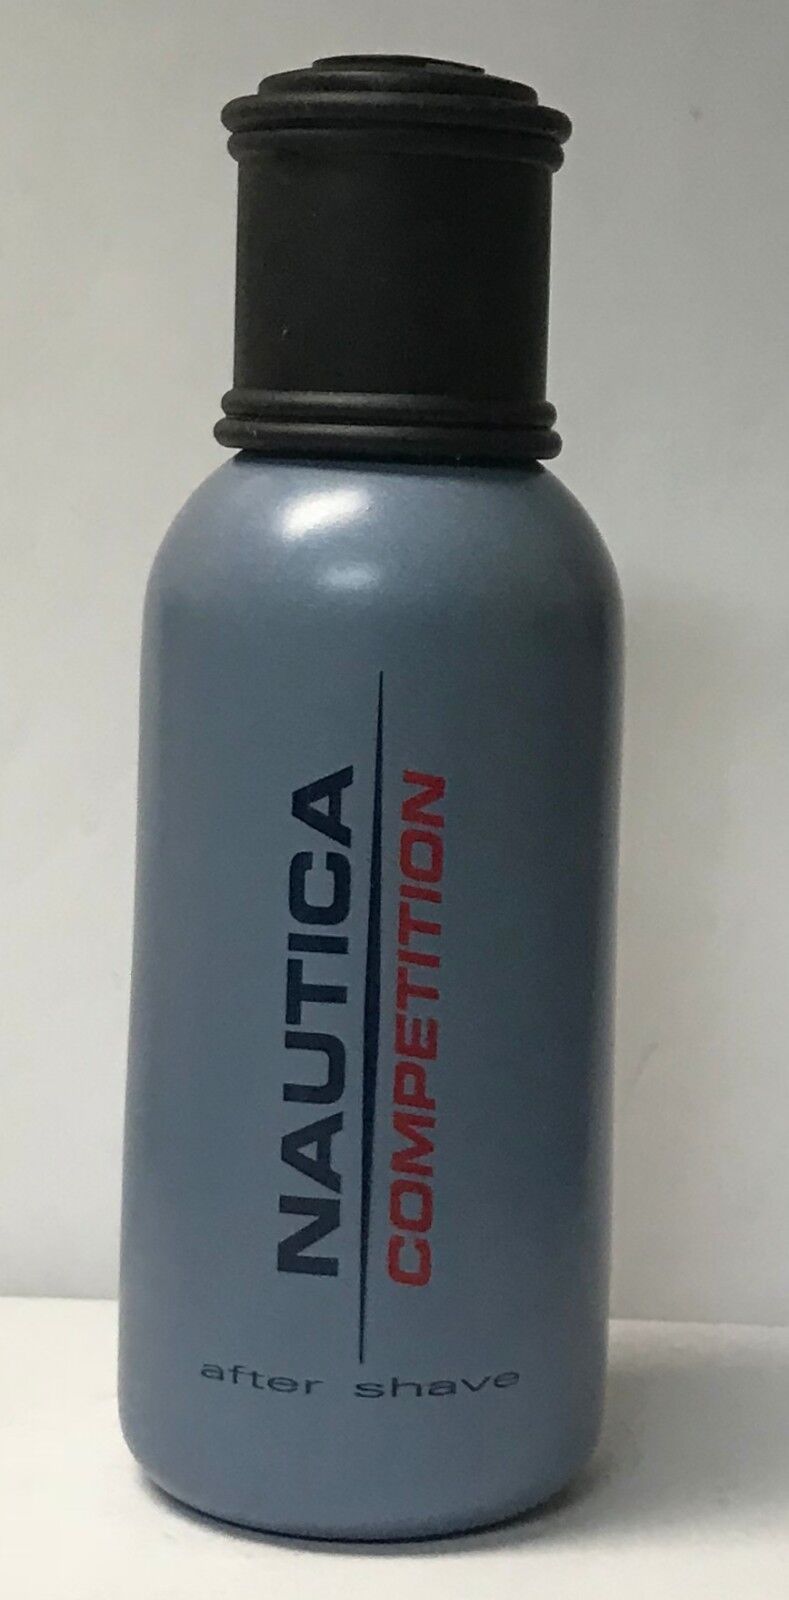 48  Nautica Competition After Shave 2.4 fl oz / 75 ml unboxed in original carton